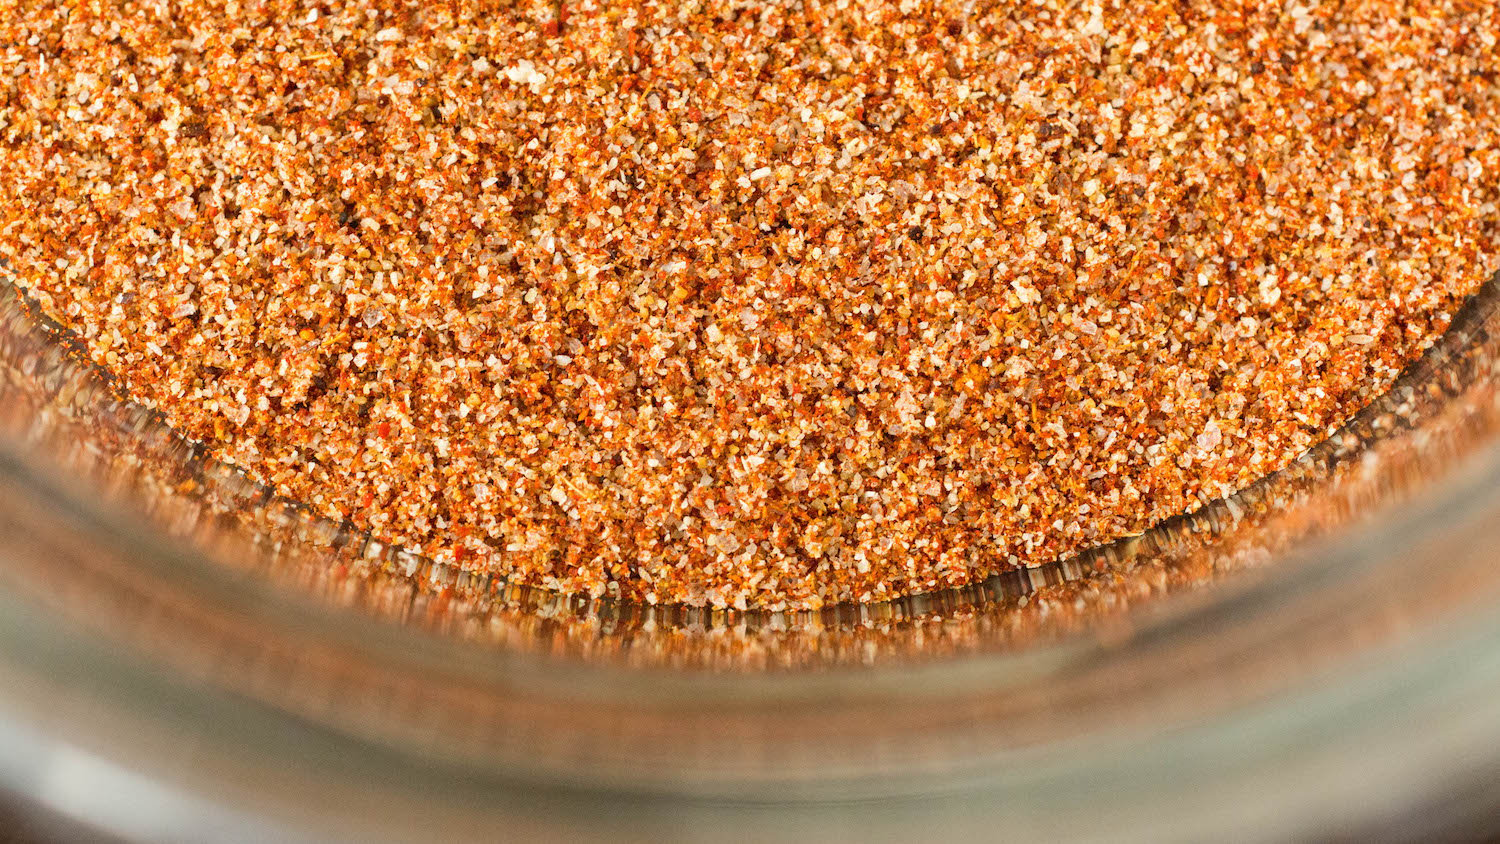 Extreme close up of a fajita seasoning blend in a glass bowl.